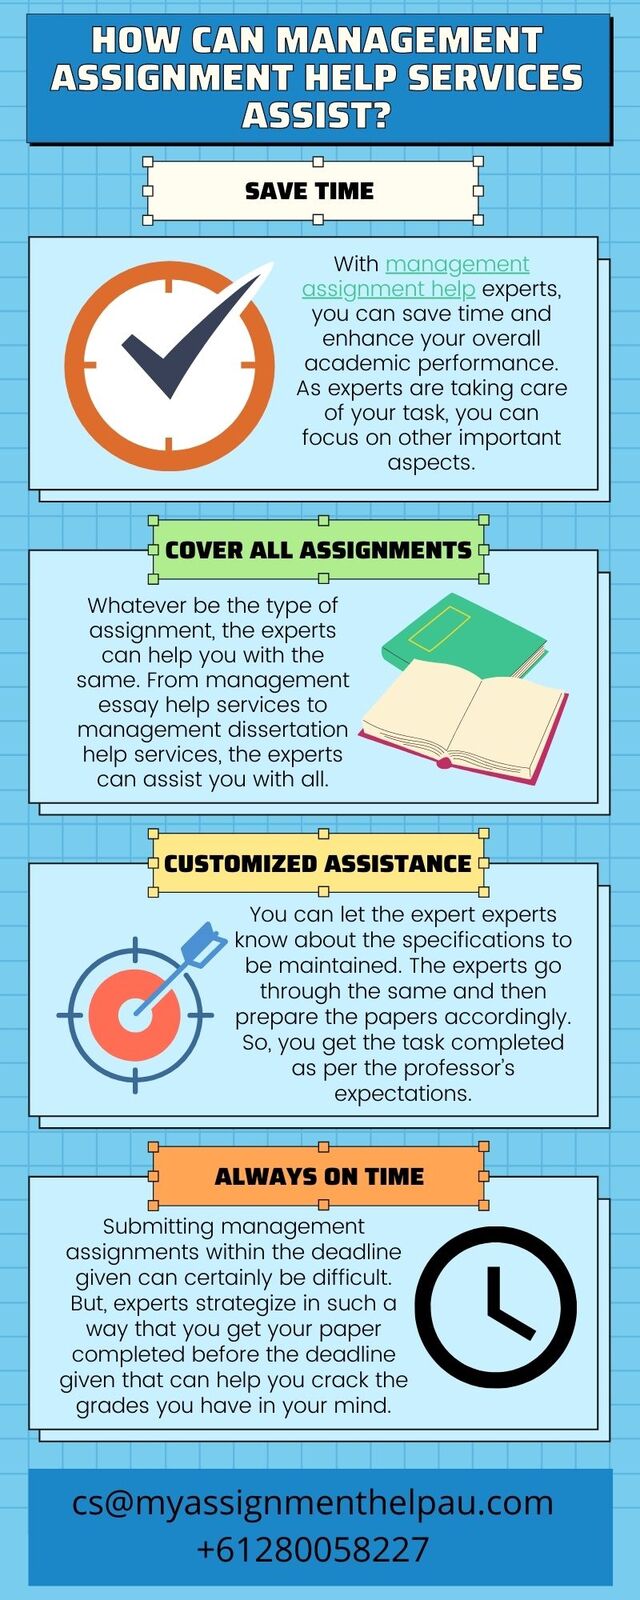 How Can Management Assignment Help Services